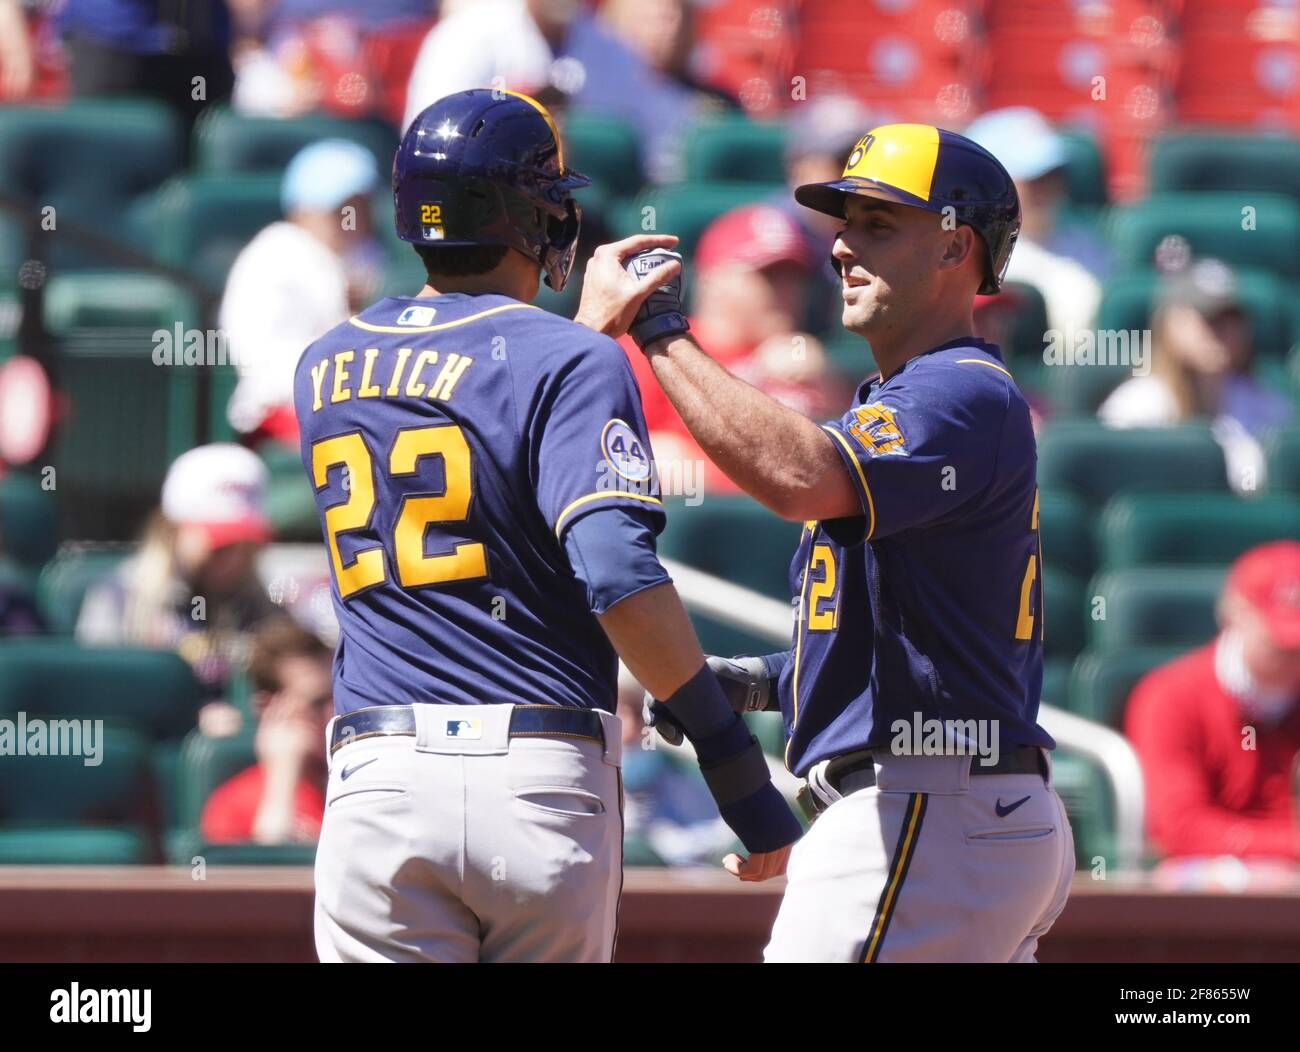 St. Louis, United States. 11th Apr, 2021. Milwaukee Brewers Manny Shaw (R) is congratulated at home plate by teammate Christian Yelich, after hitting a three run home run in the second inning against the St. Louis Cardinals at Busch Stadium in St. Louis on Sunday, April 11. 2021. Photo by Bill Greenblatt/UPI Credit: UPI/Alamy Live News Stock Photo